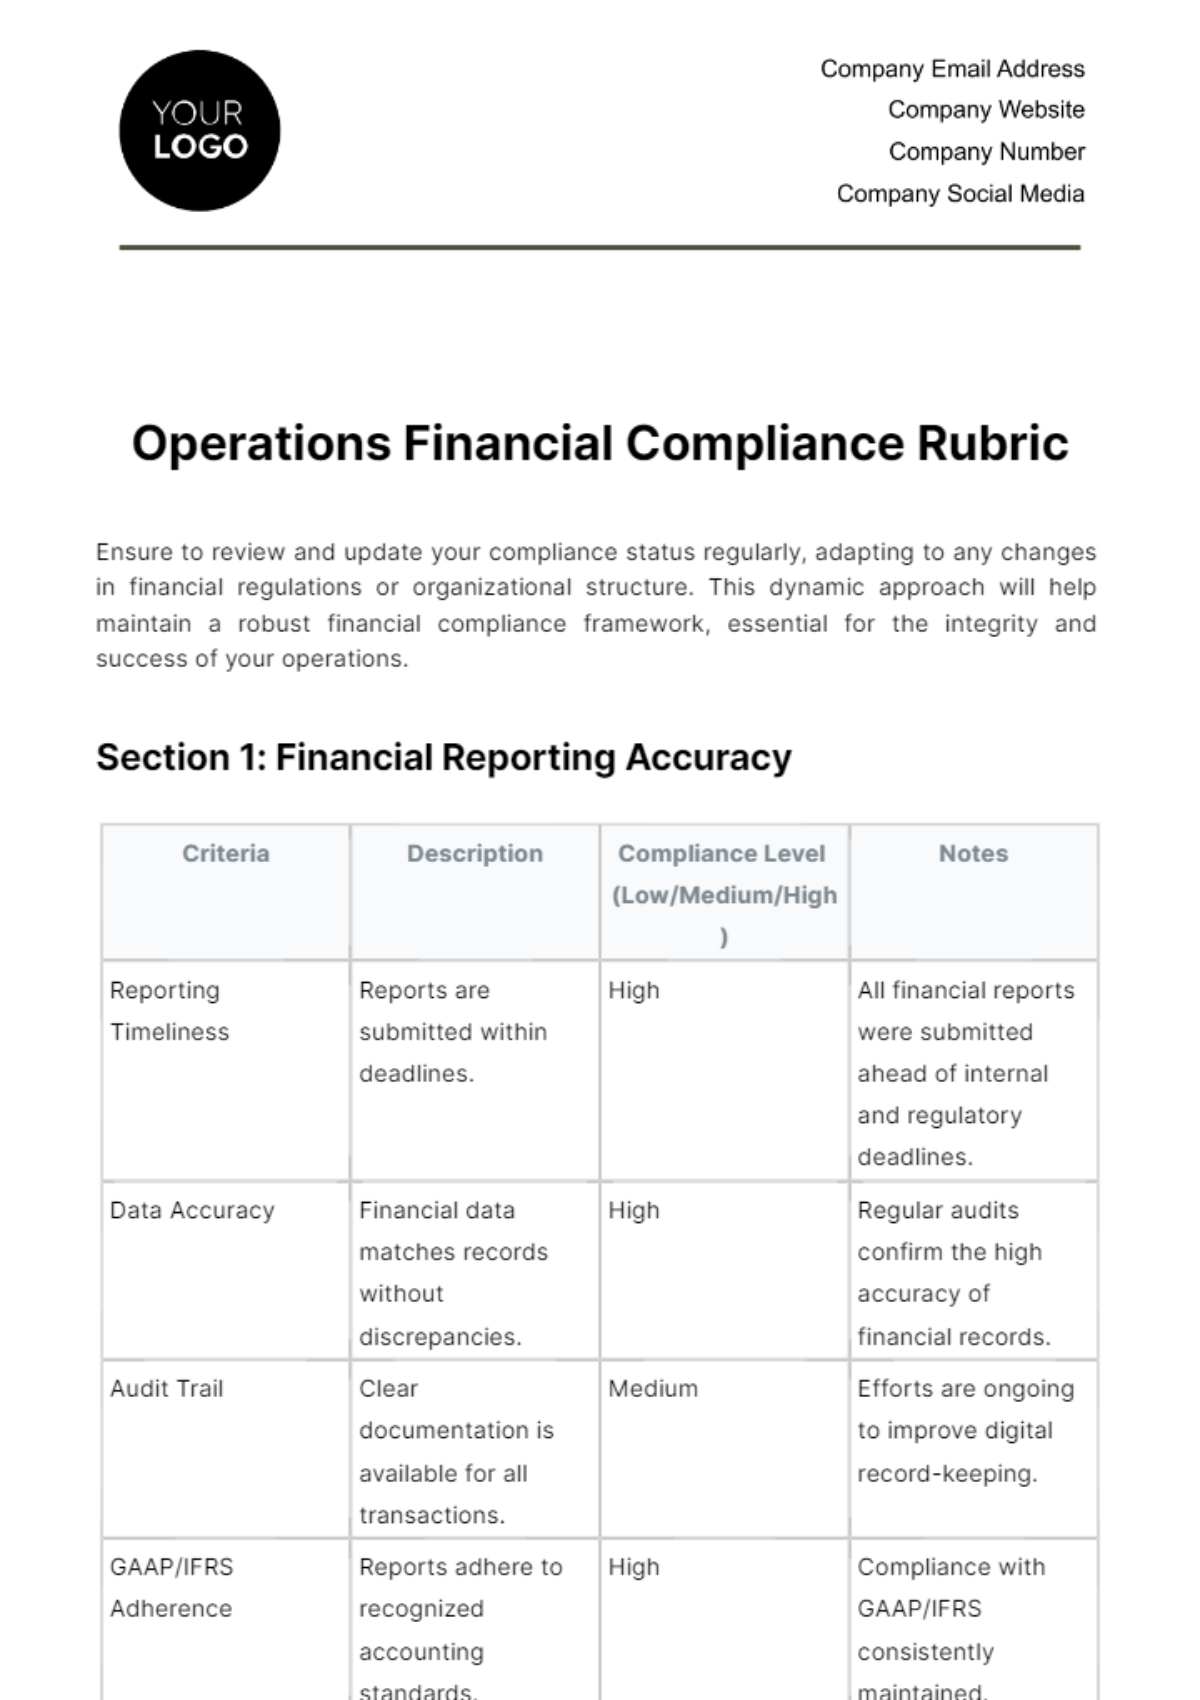 Operations Financial Compliance Rubric Template